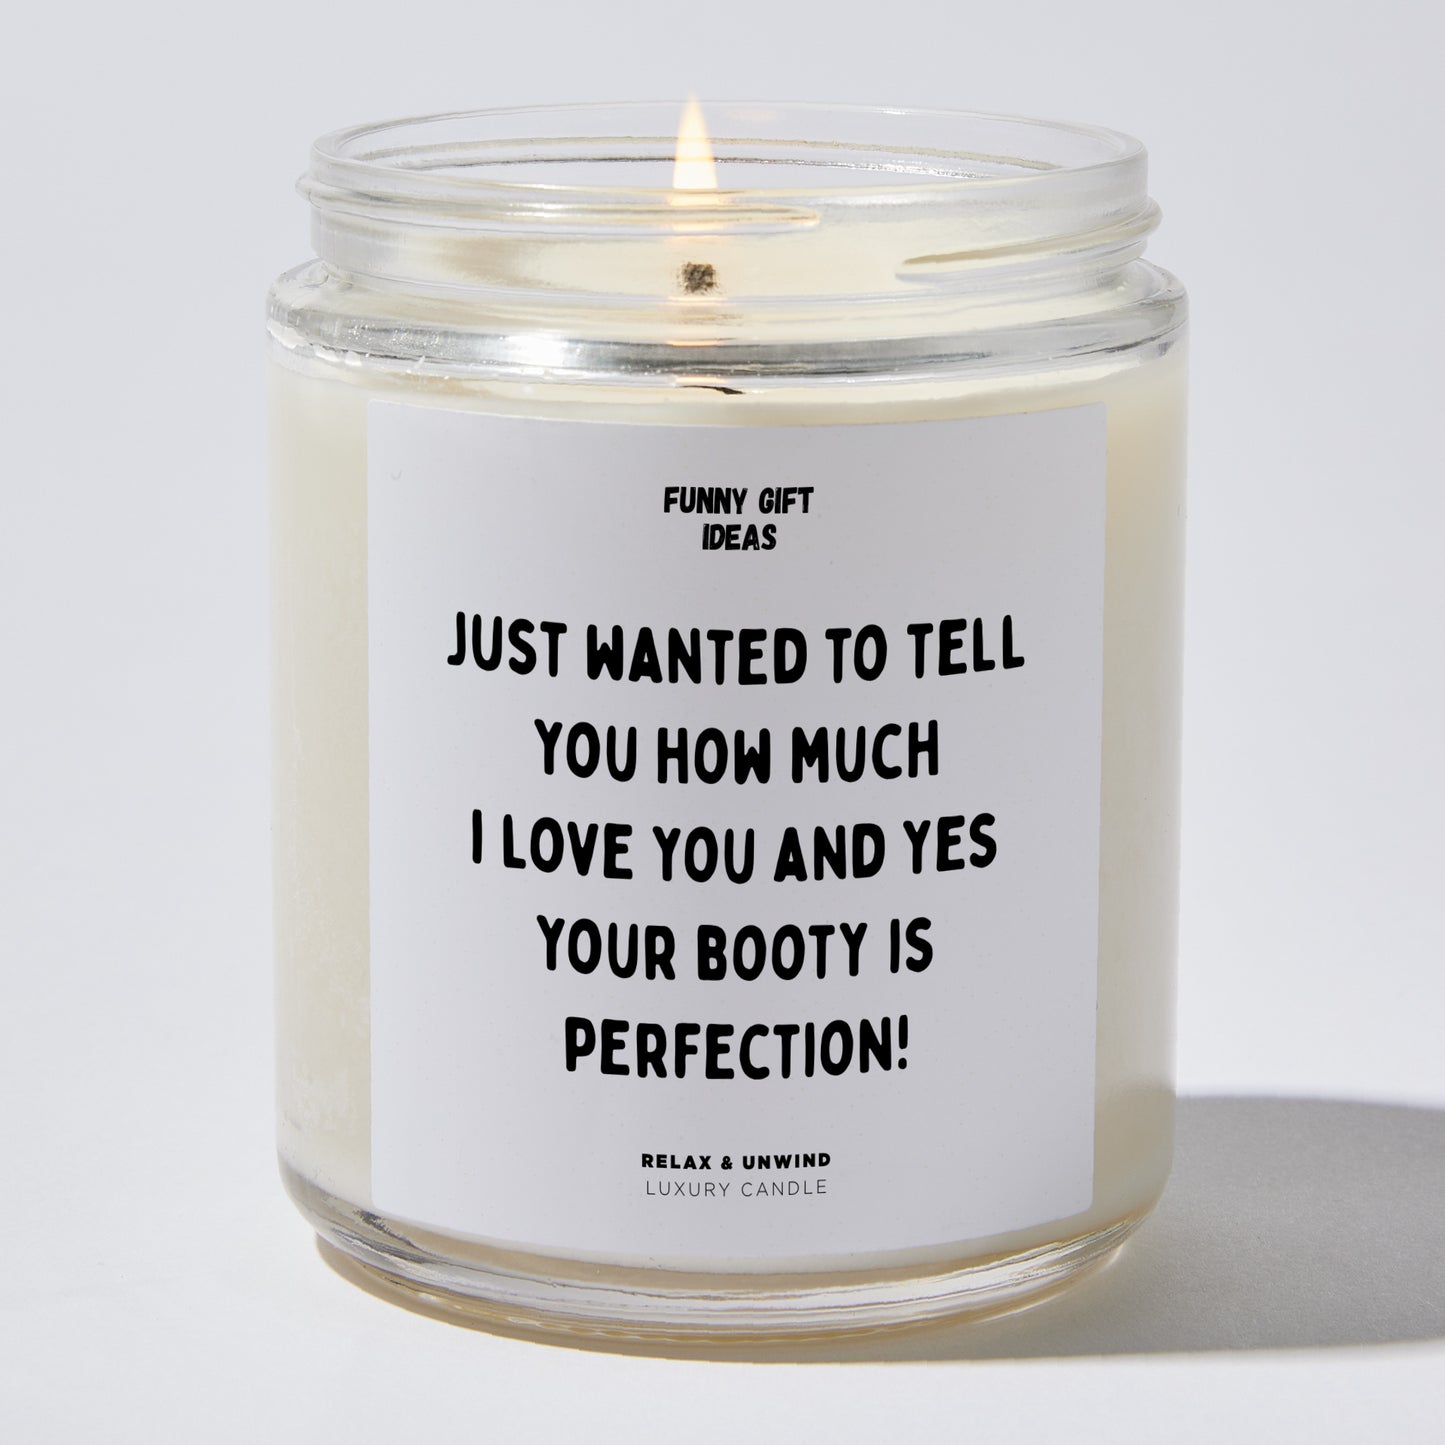 Anniversary Present - Just Wanted to Tell You How Much I Love You, and Yes, Your Booty is Perfection! - Candle